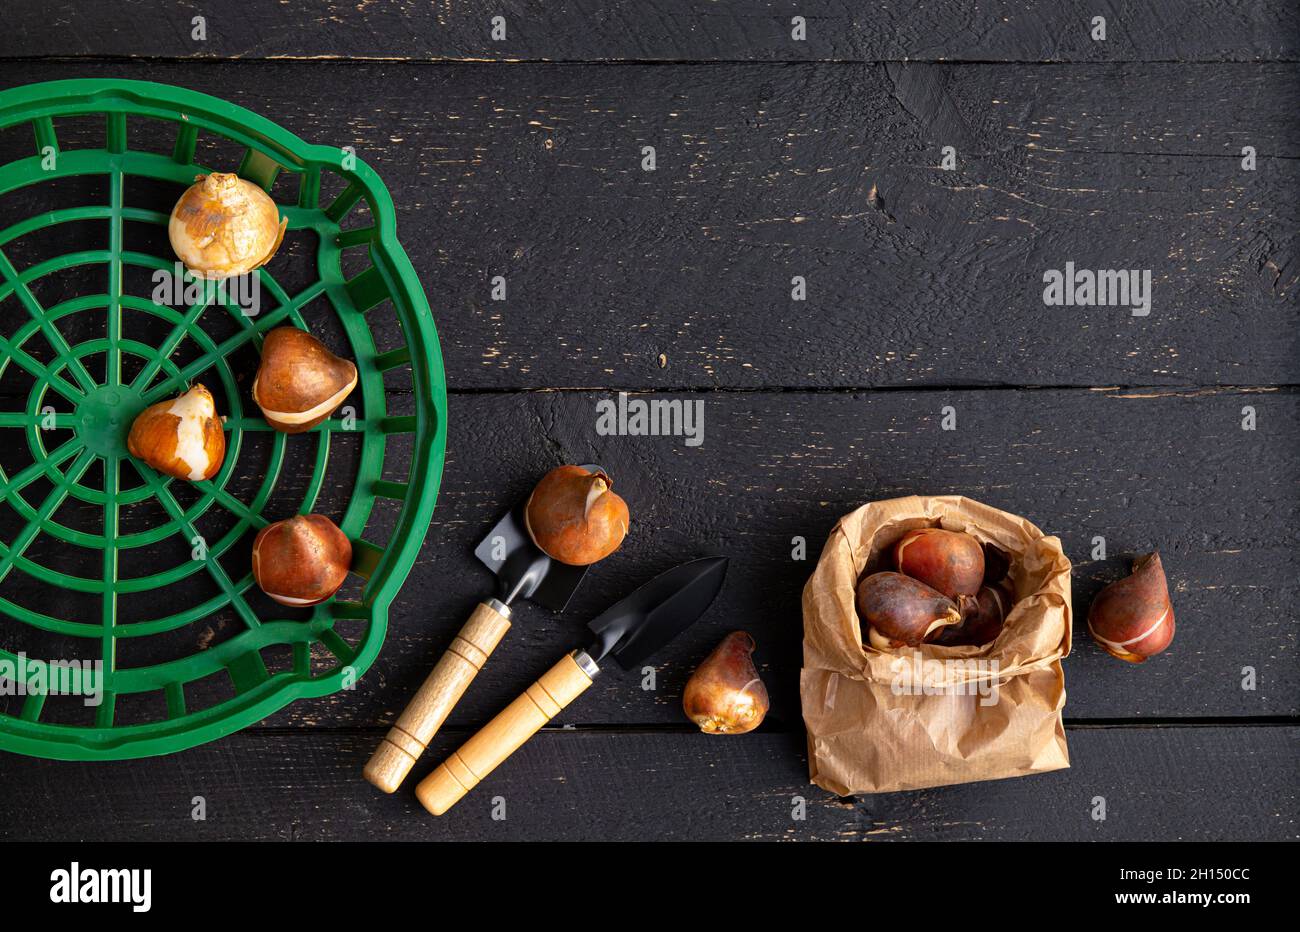 Above view of tulip planting basket with tulip bulbs in brown paper bag. Black wood board gardening background. Stock Photo